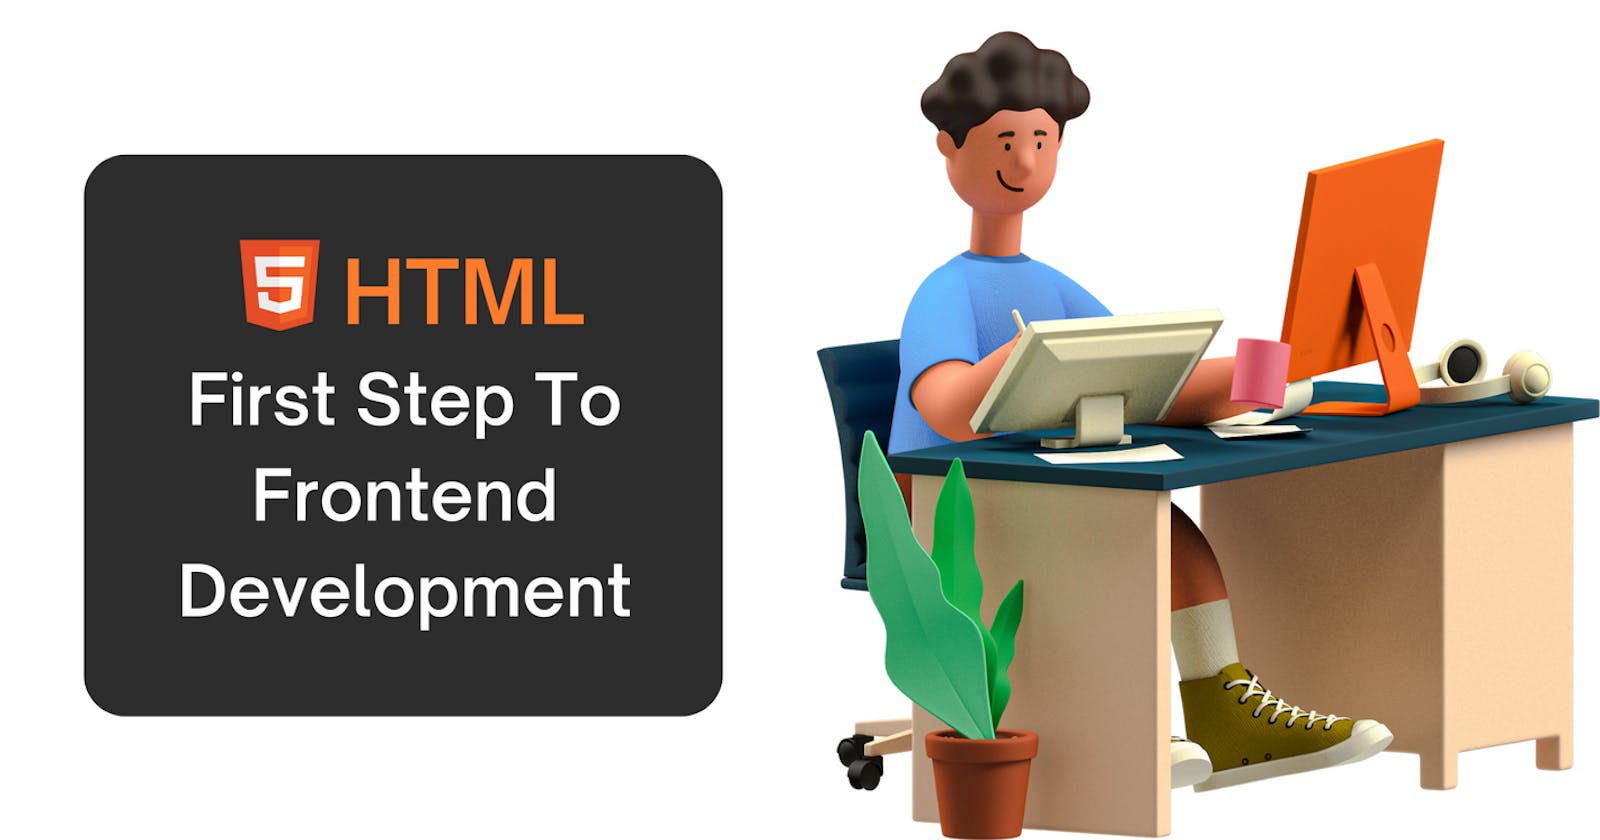 HTML - First Step To Frontend Development